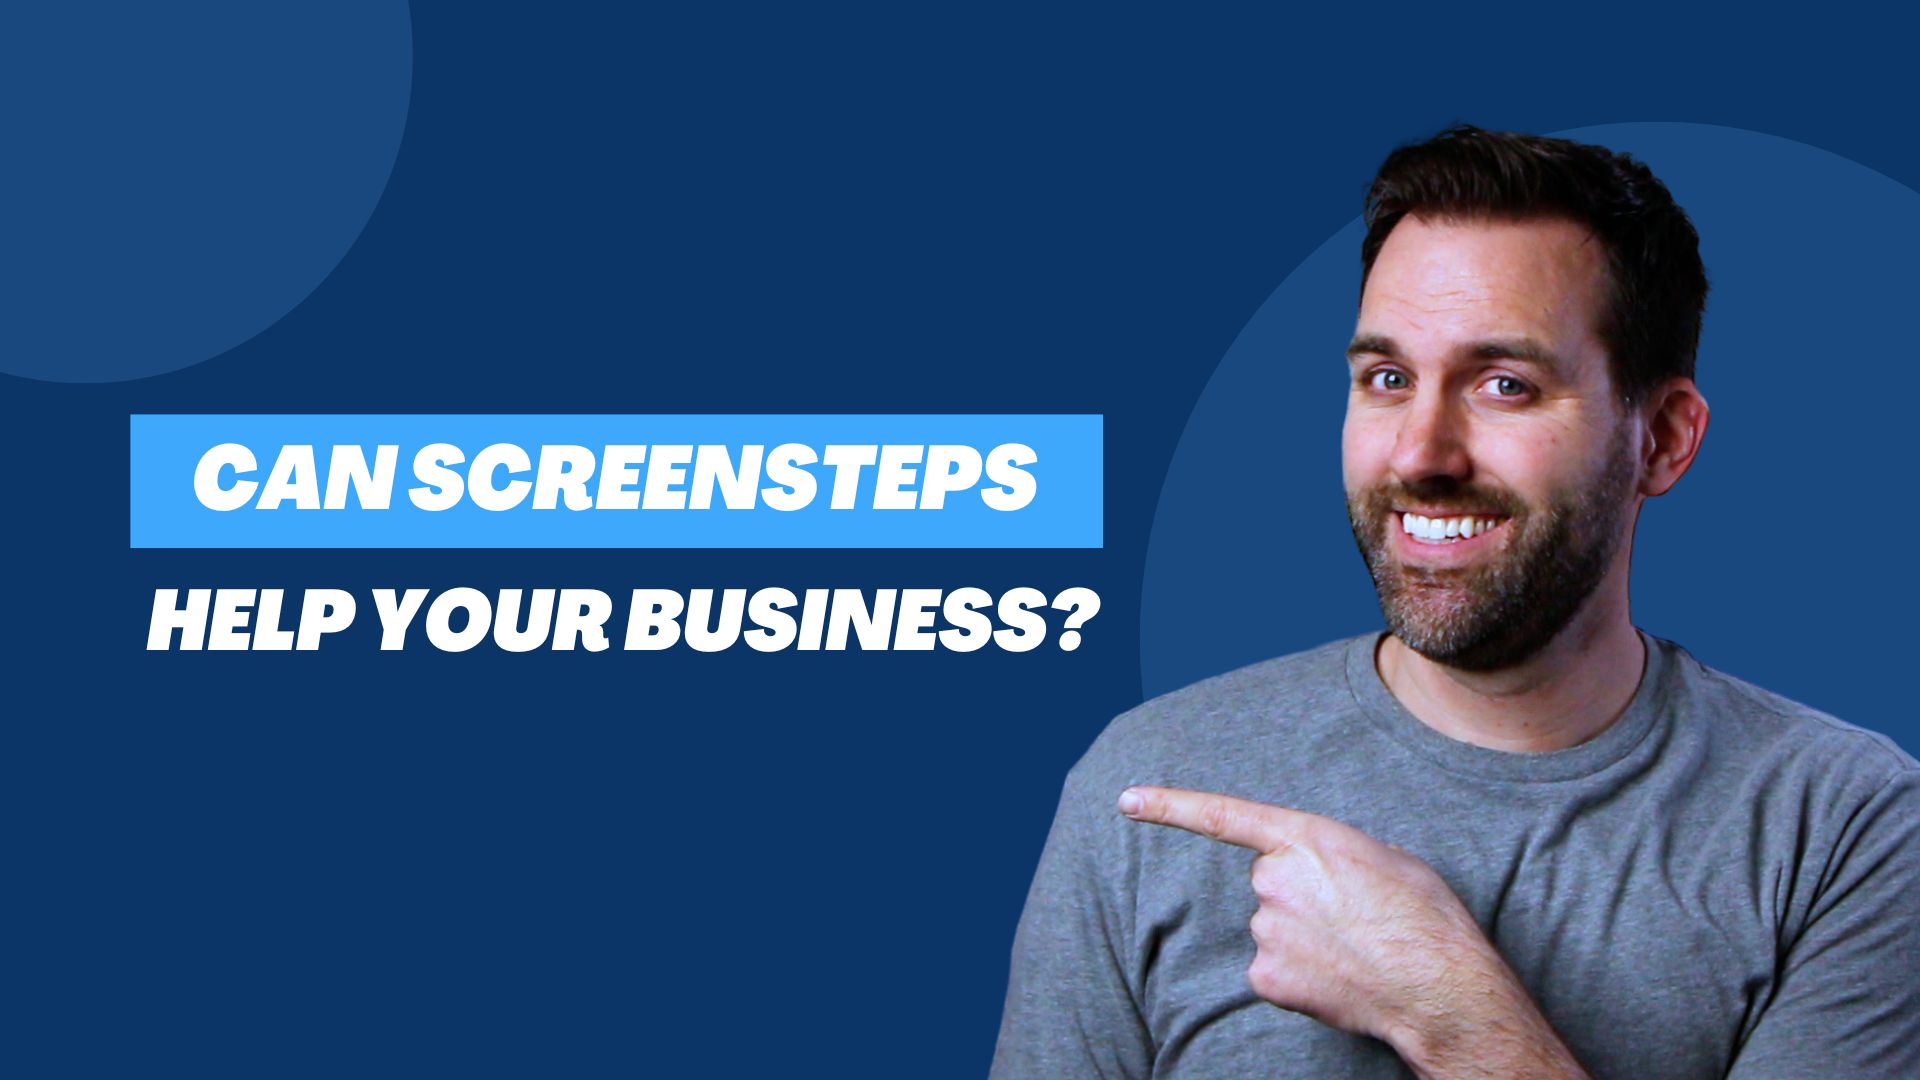 How Does ScreenSteps Help Your Business?